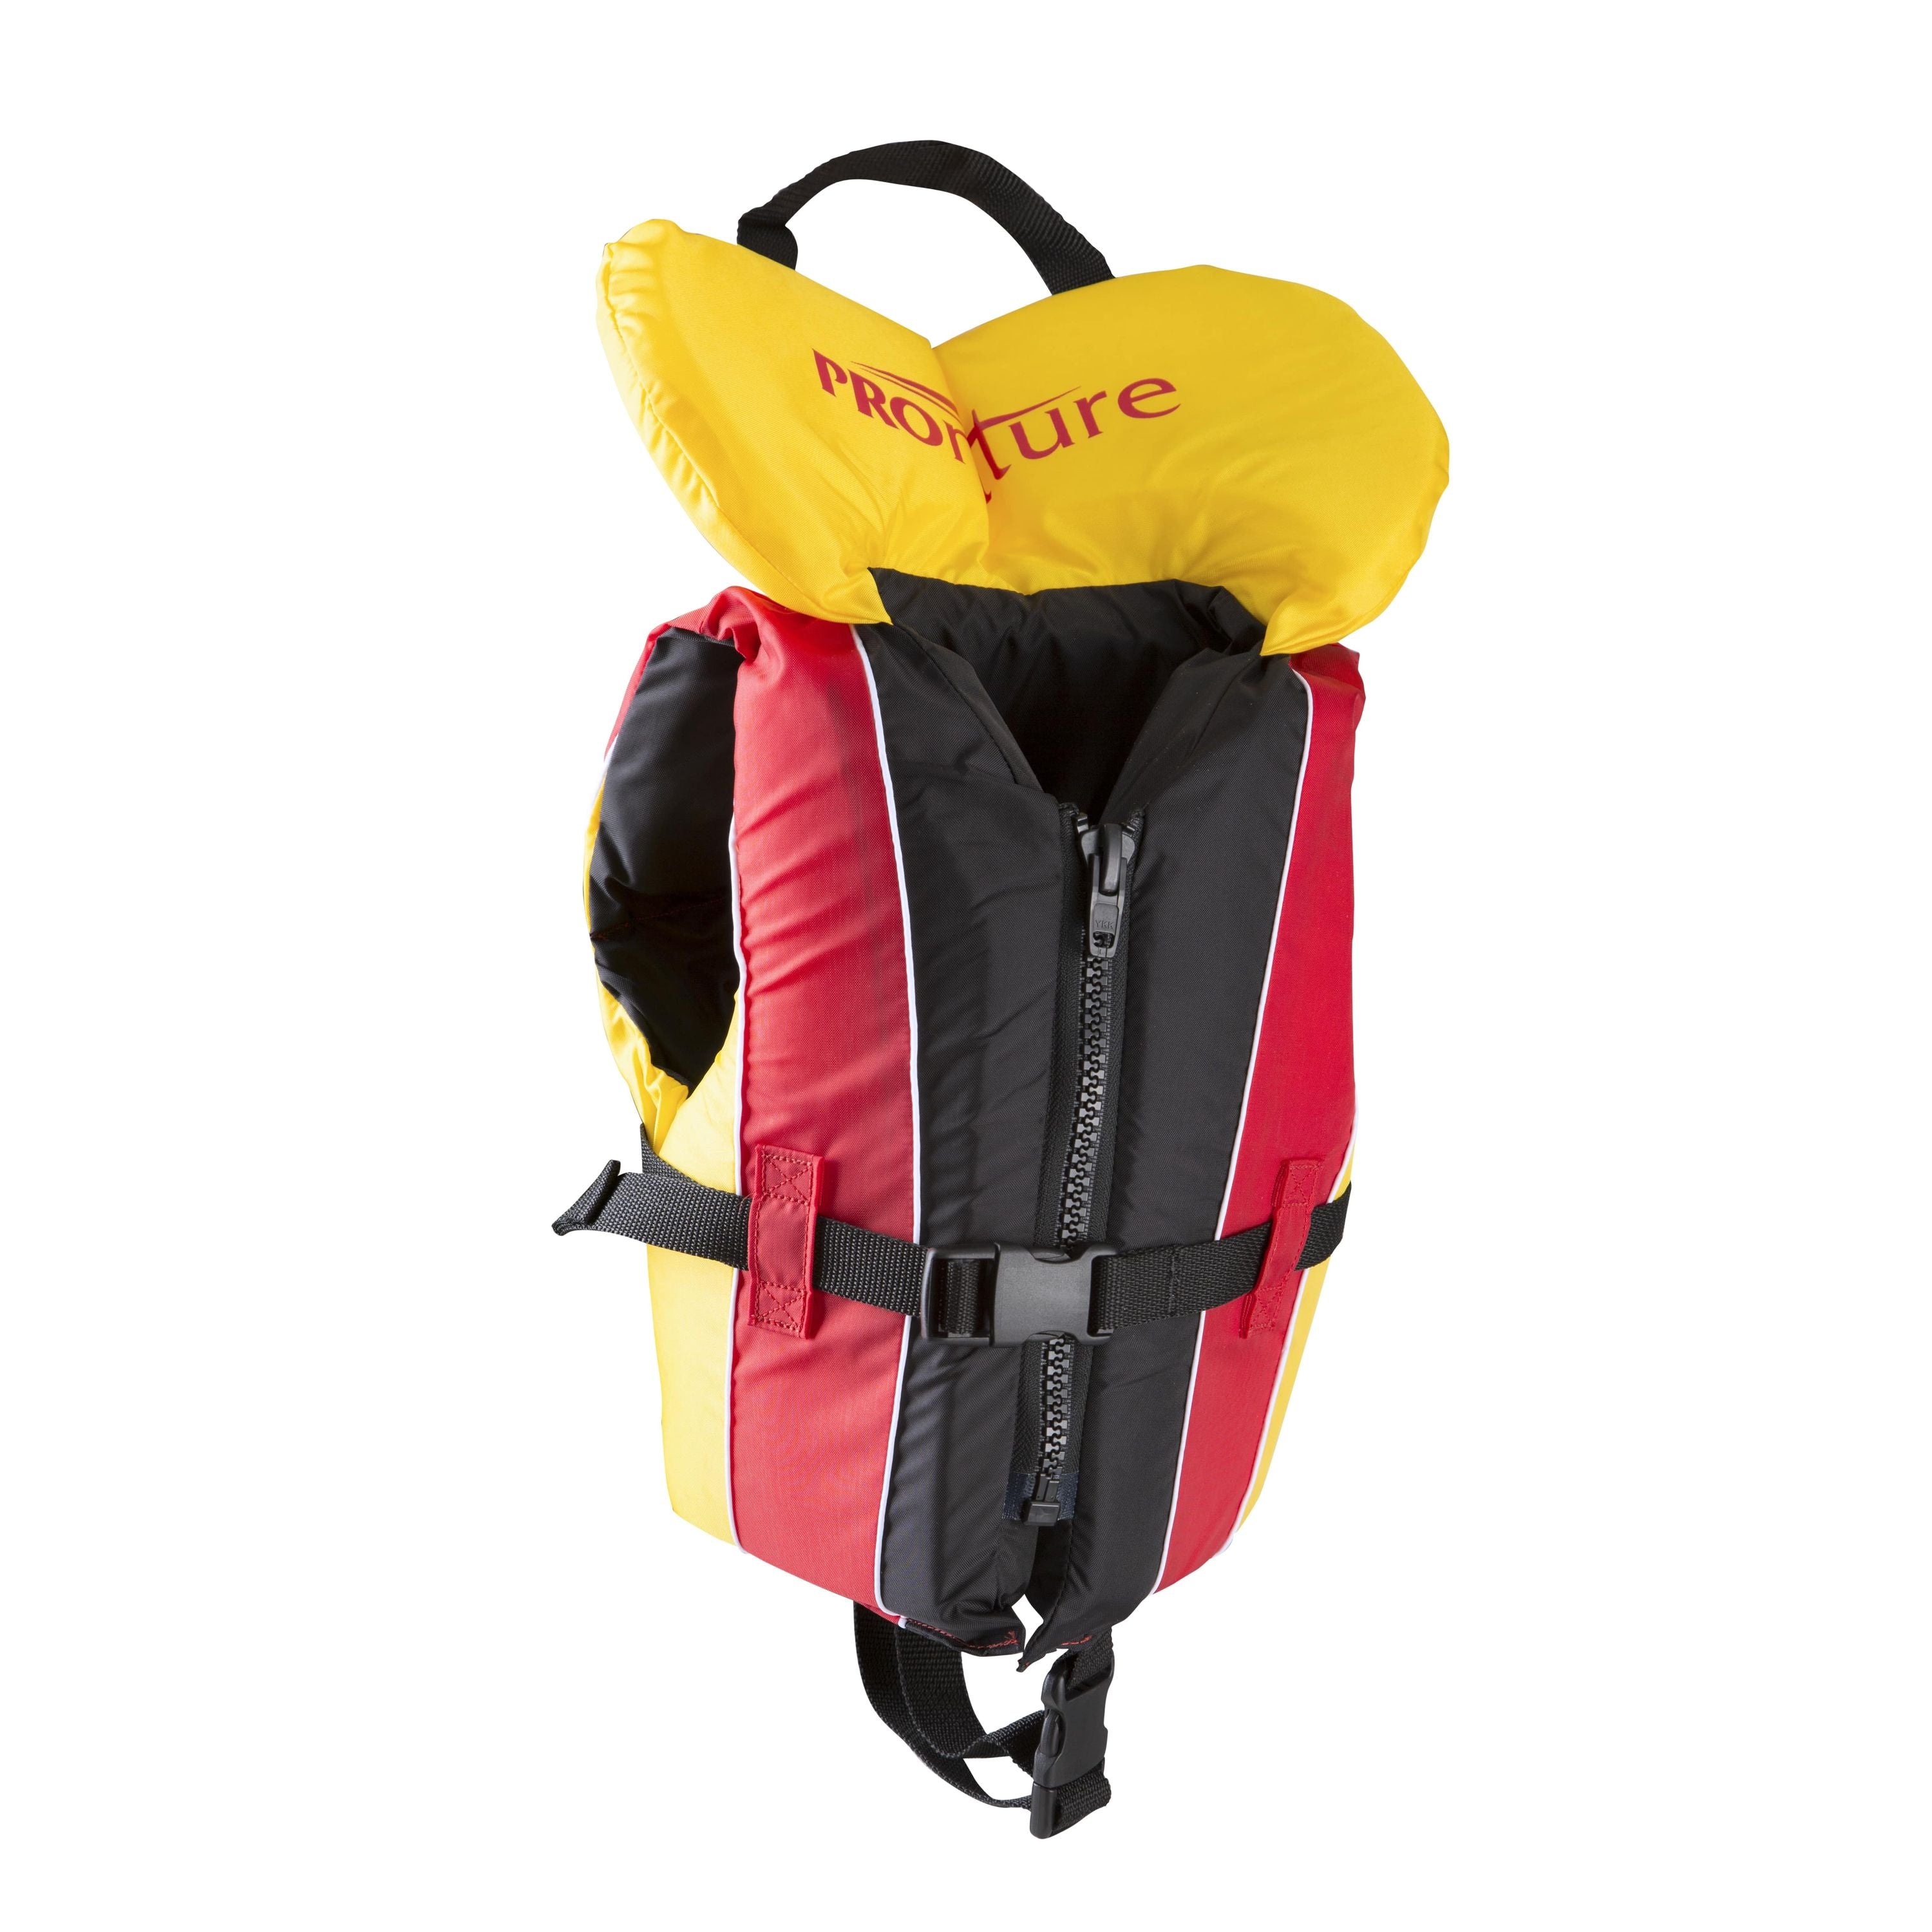 Personal flotation device for kids